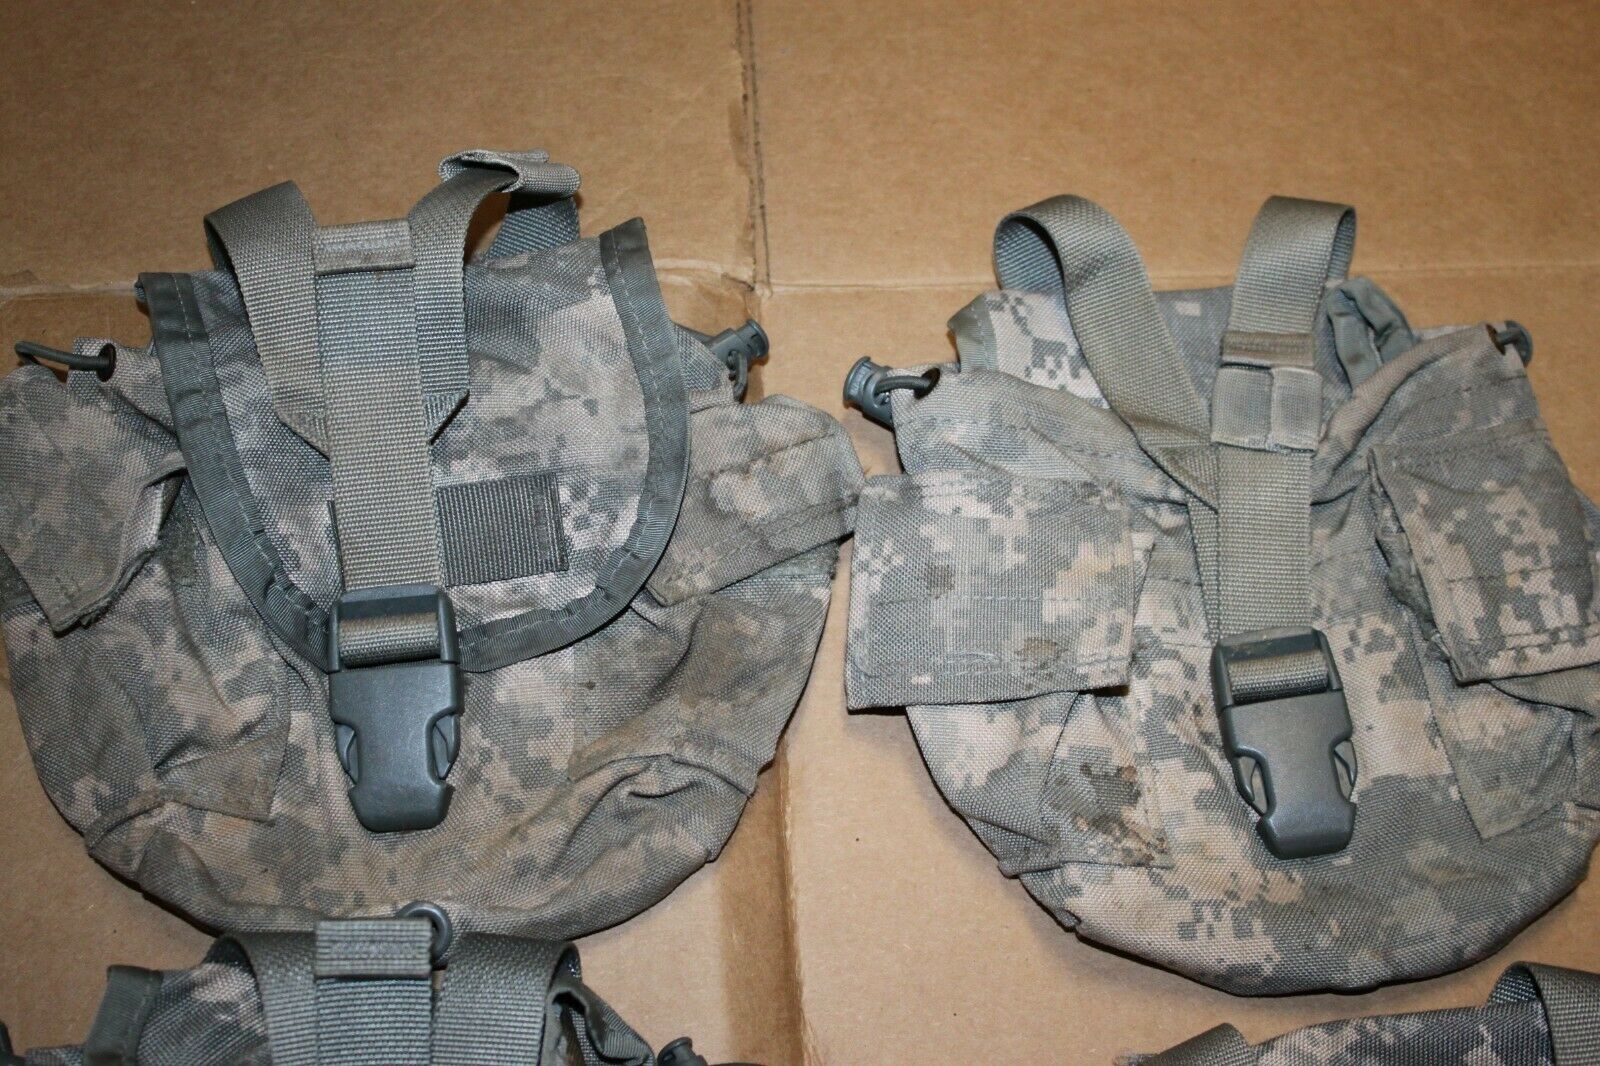 (5) US Military 1 QT MOLLE ACU Camo Canteen Cover Carrier Utility Pouch Damaged